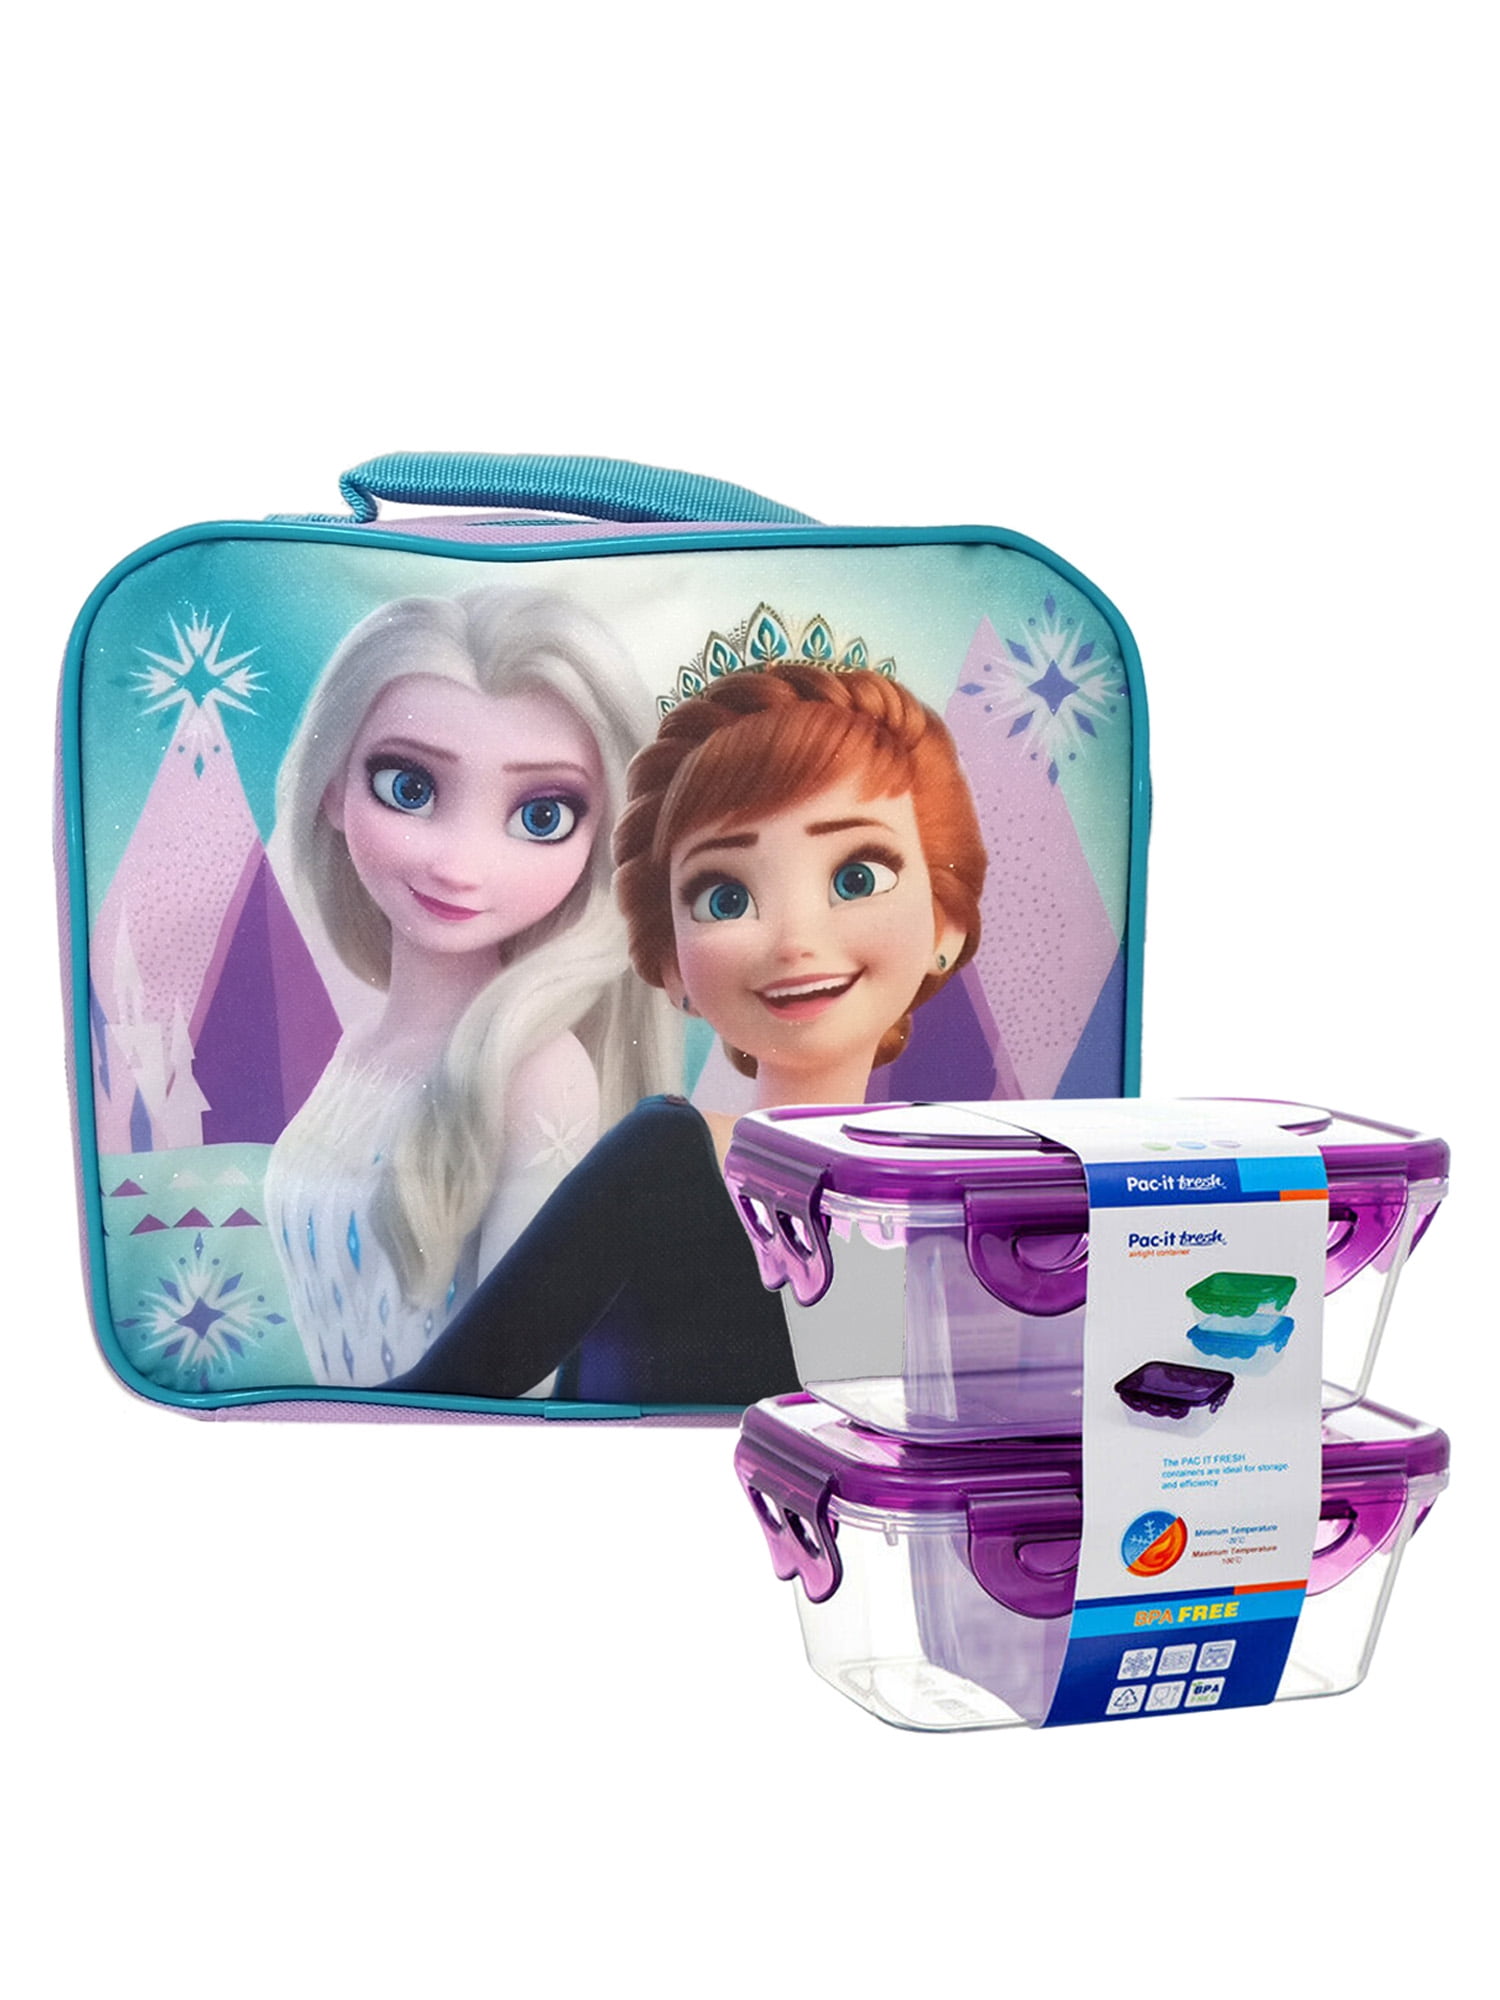 Frozen Lunch Bag with Anna and Elsa is Back in Stock!